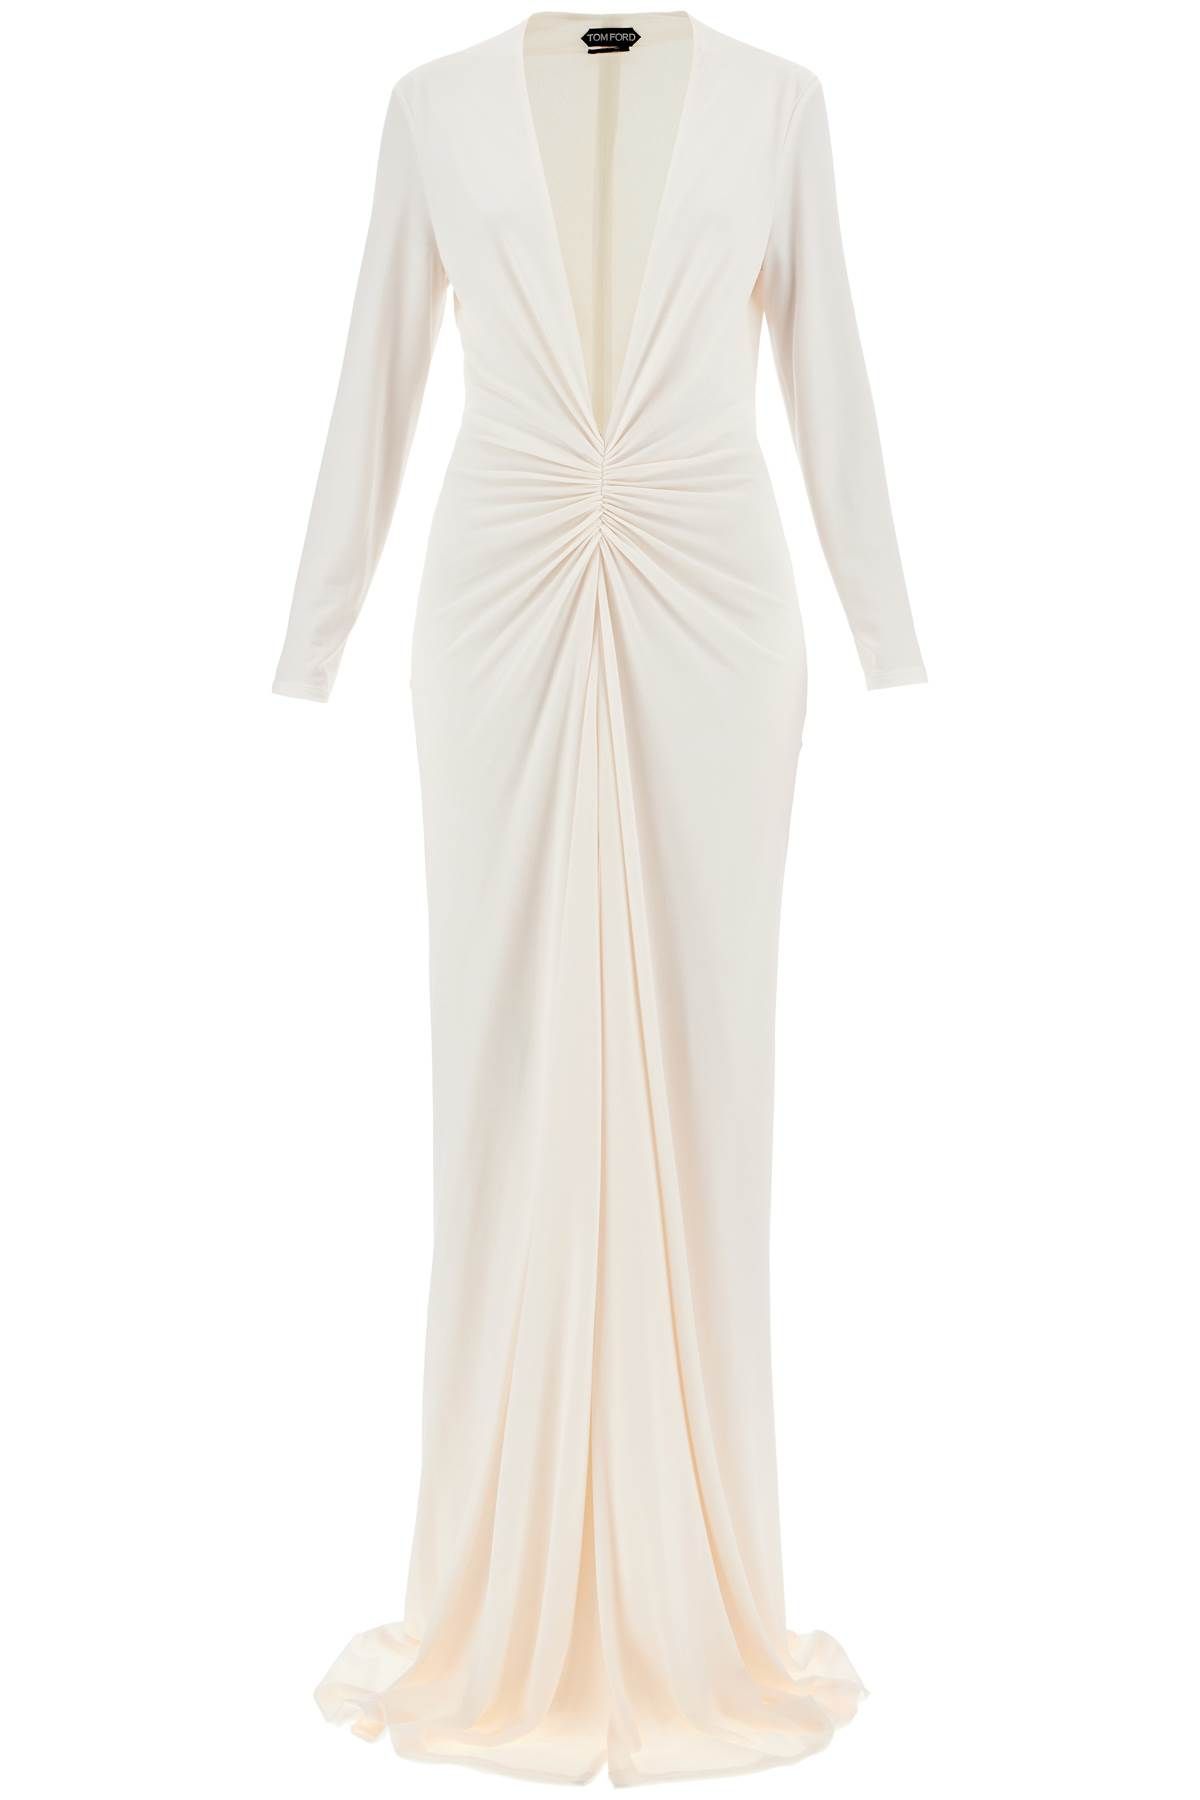 Tom Ford TOM FORD long stretch jersey evening dress